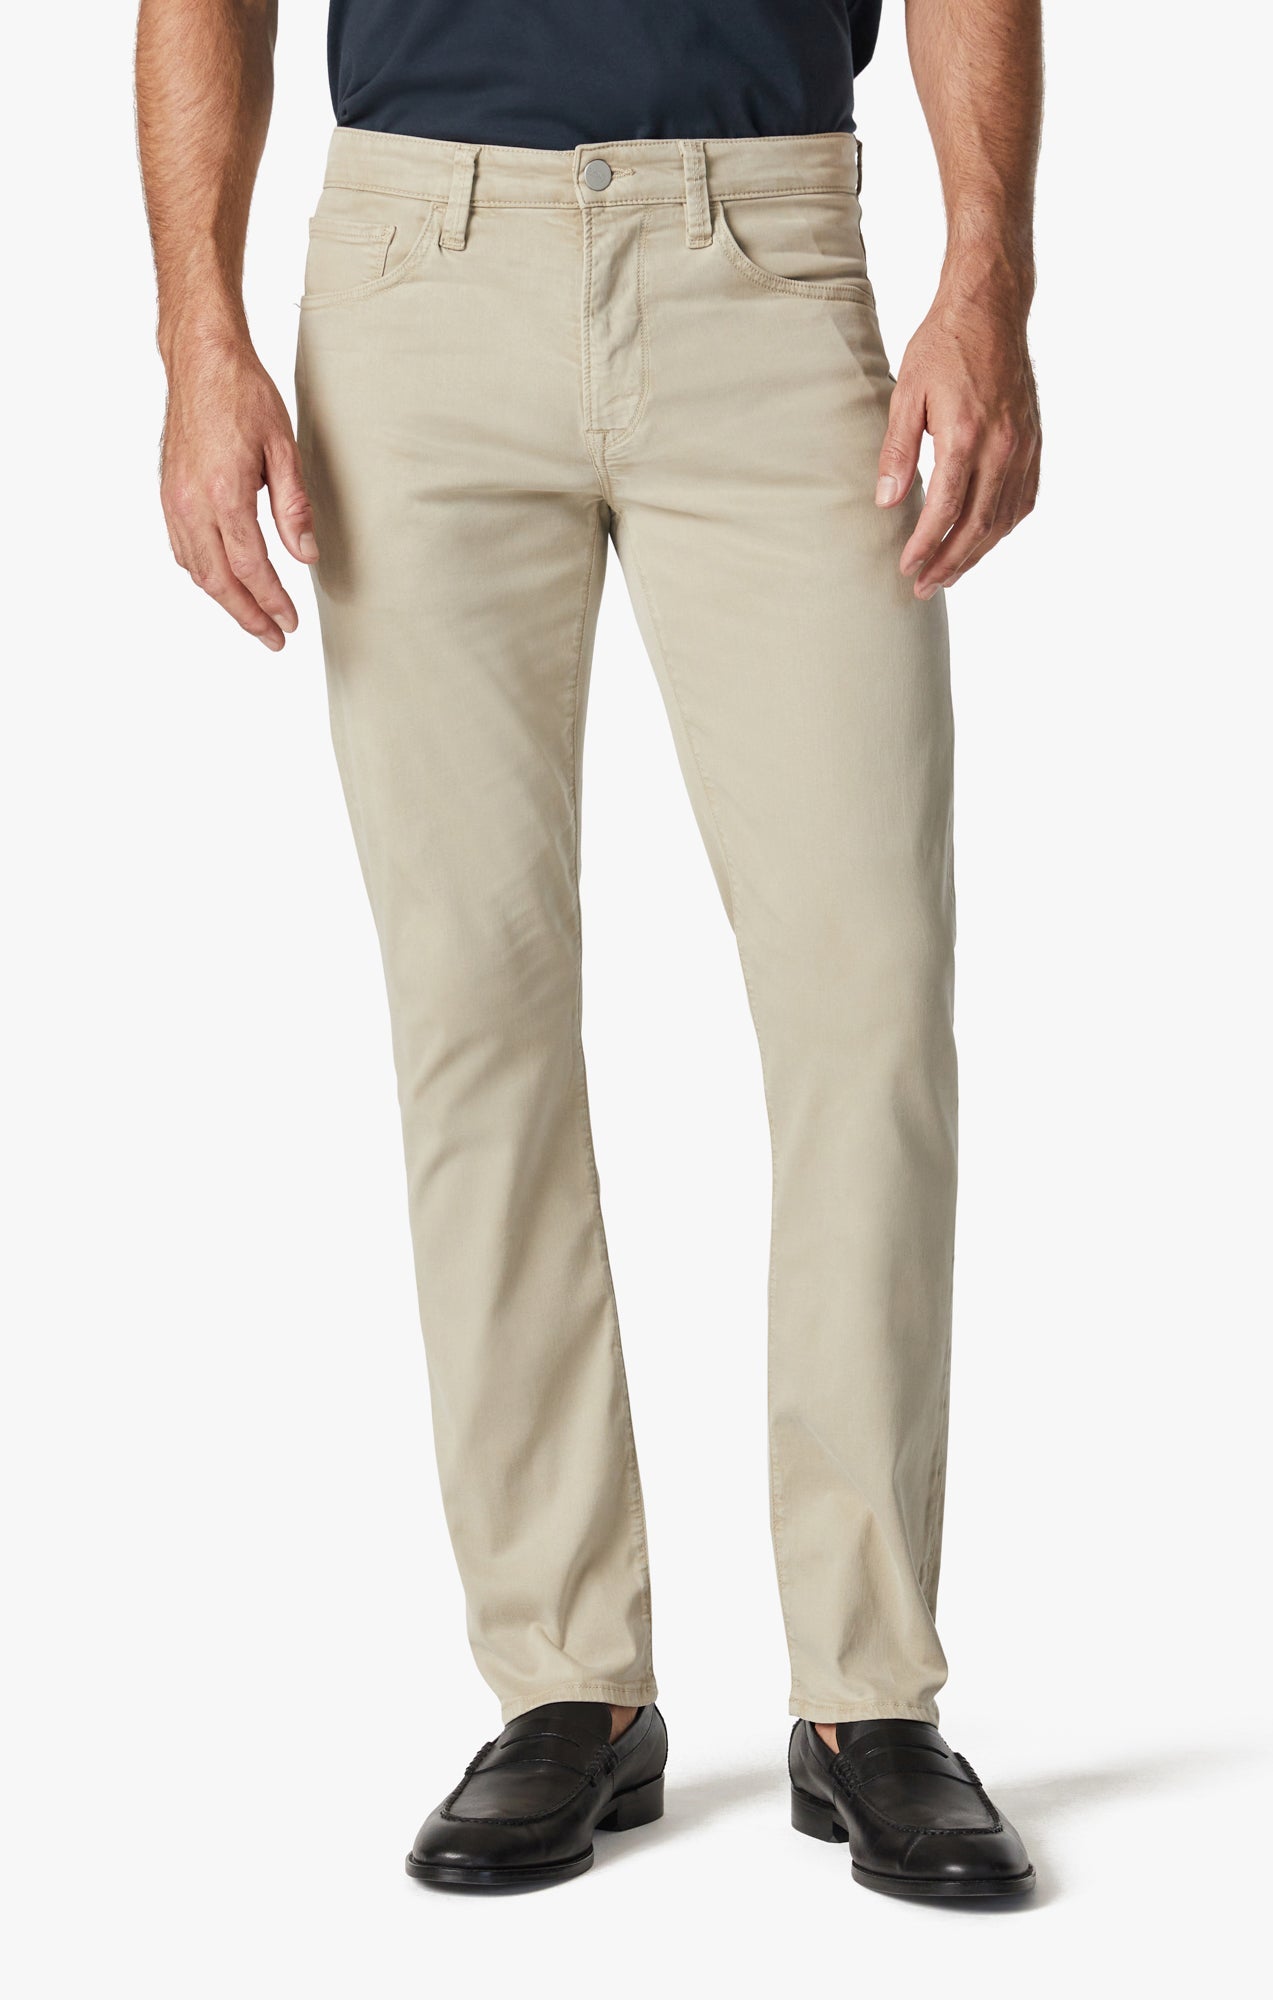 Courage Straight Leg Pants In Aluminum Twill Image 3